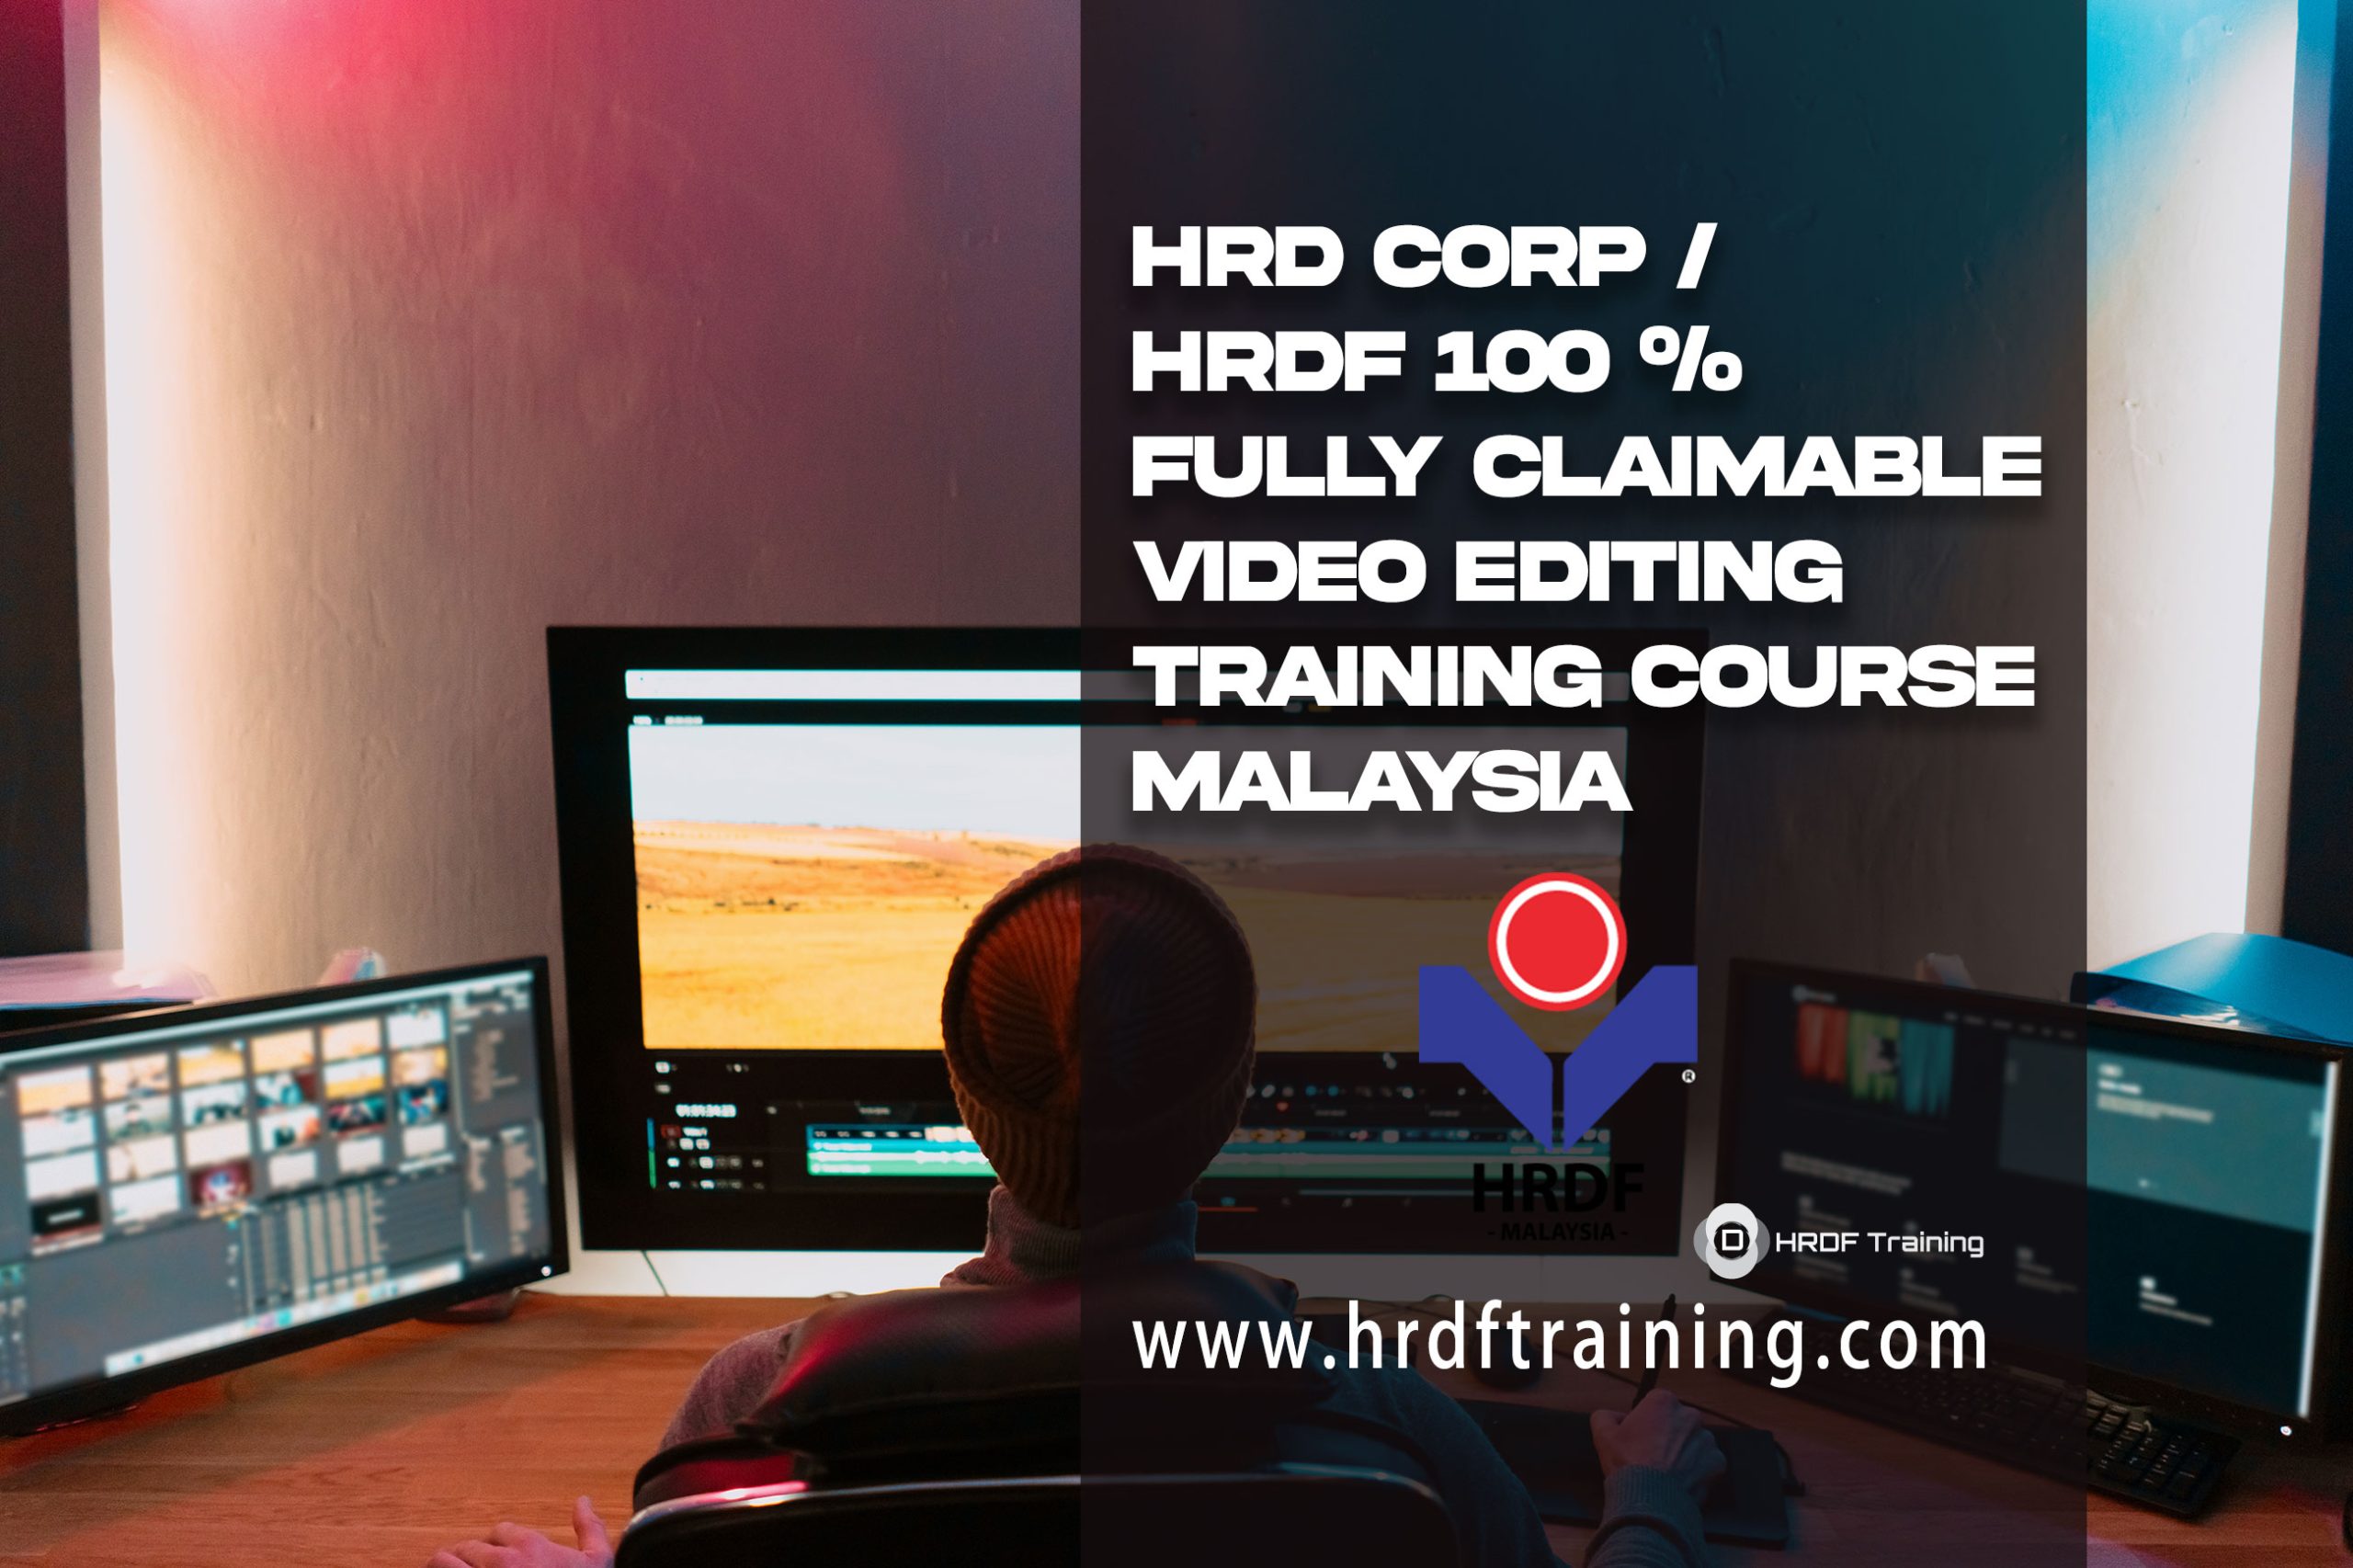 HRDF HRD Corp Claimable Video Editing Training Course Malaysia - July 2022